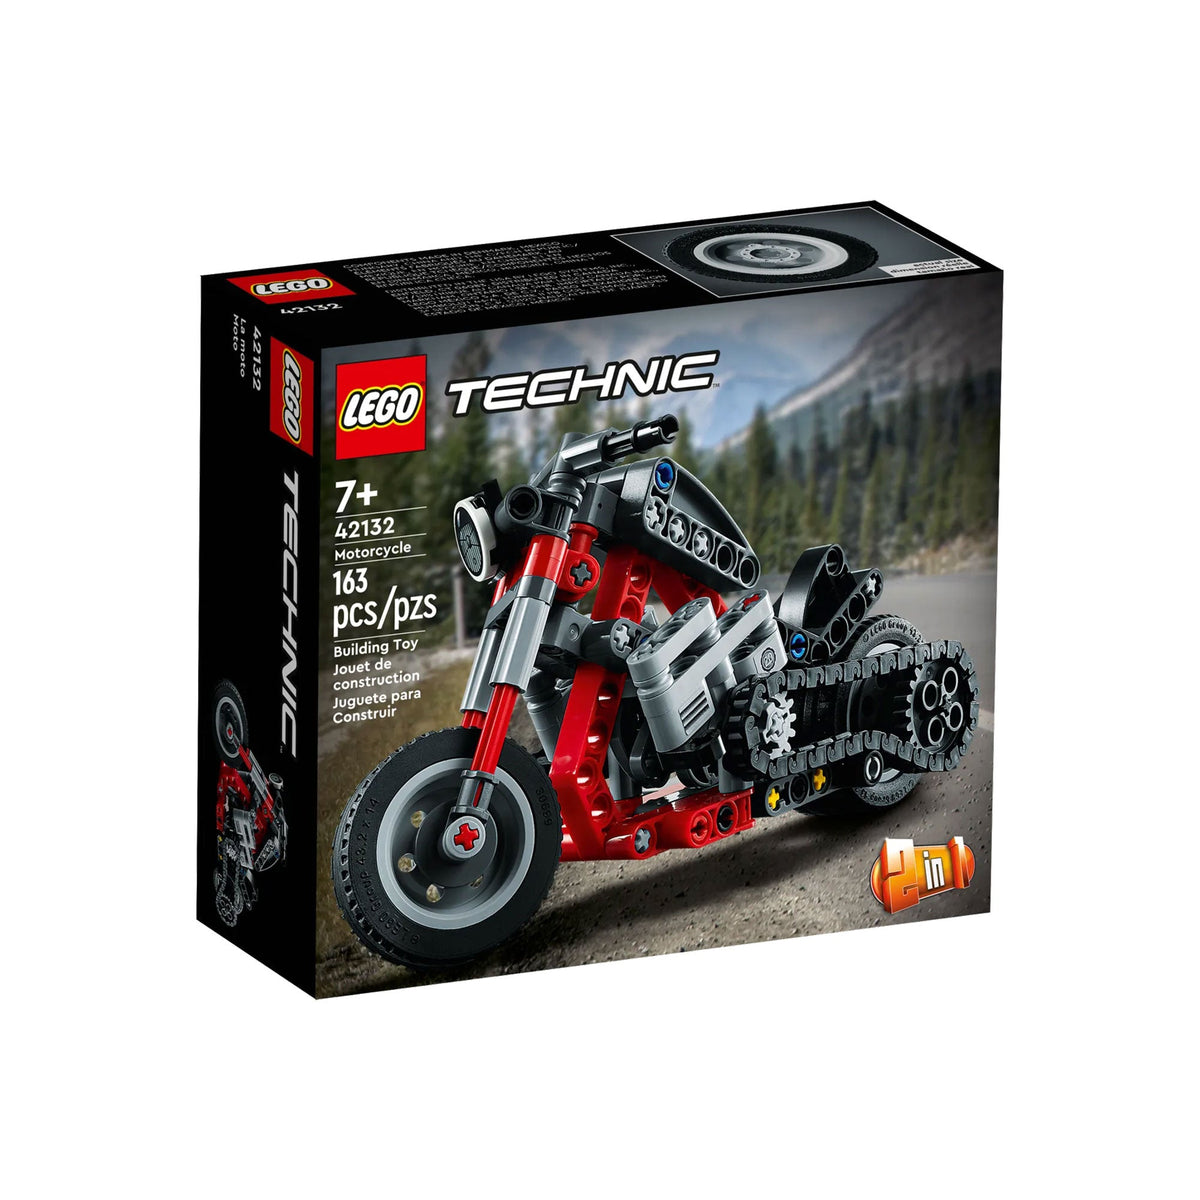 LEGO Toys & Games LEGO Technic Motorcycle, 42132, Ages 7+, 163 Pieces